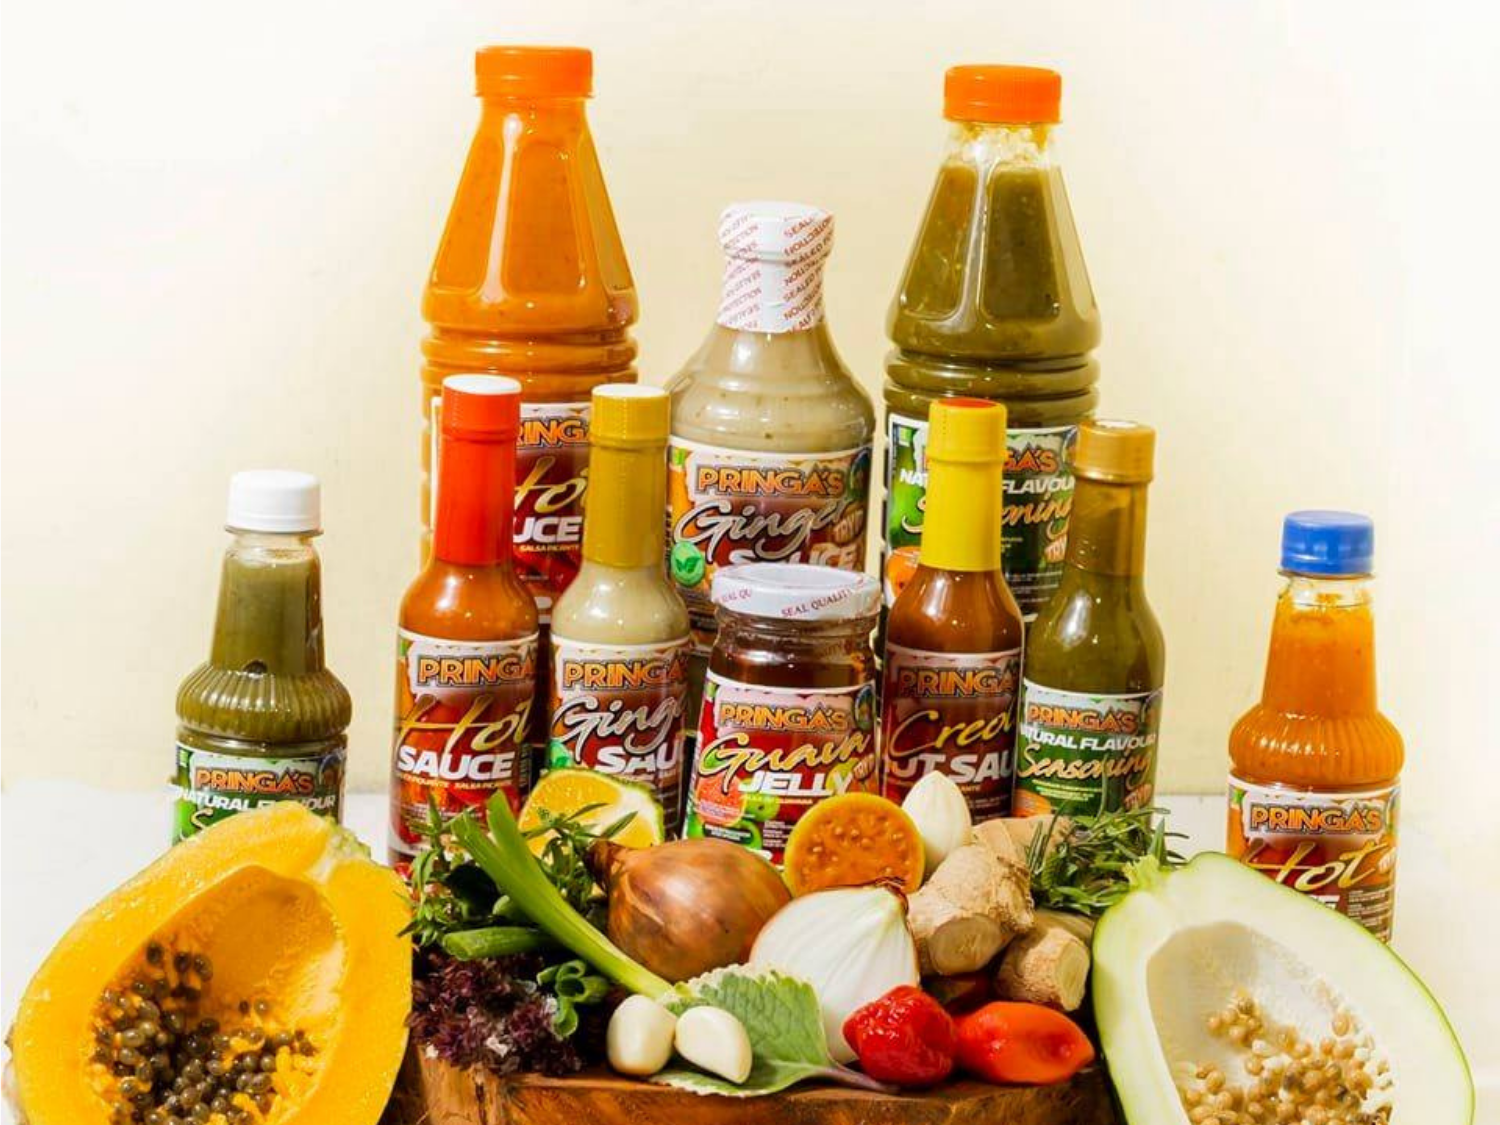 Vincentian brand ‘Pringa’s Natural Flavours’ exports taste of the Caribbean